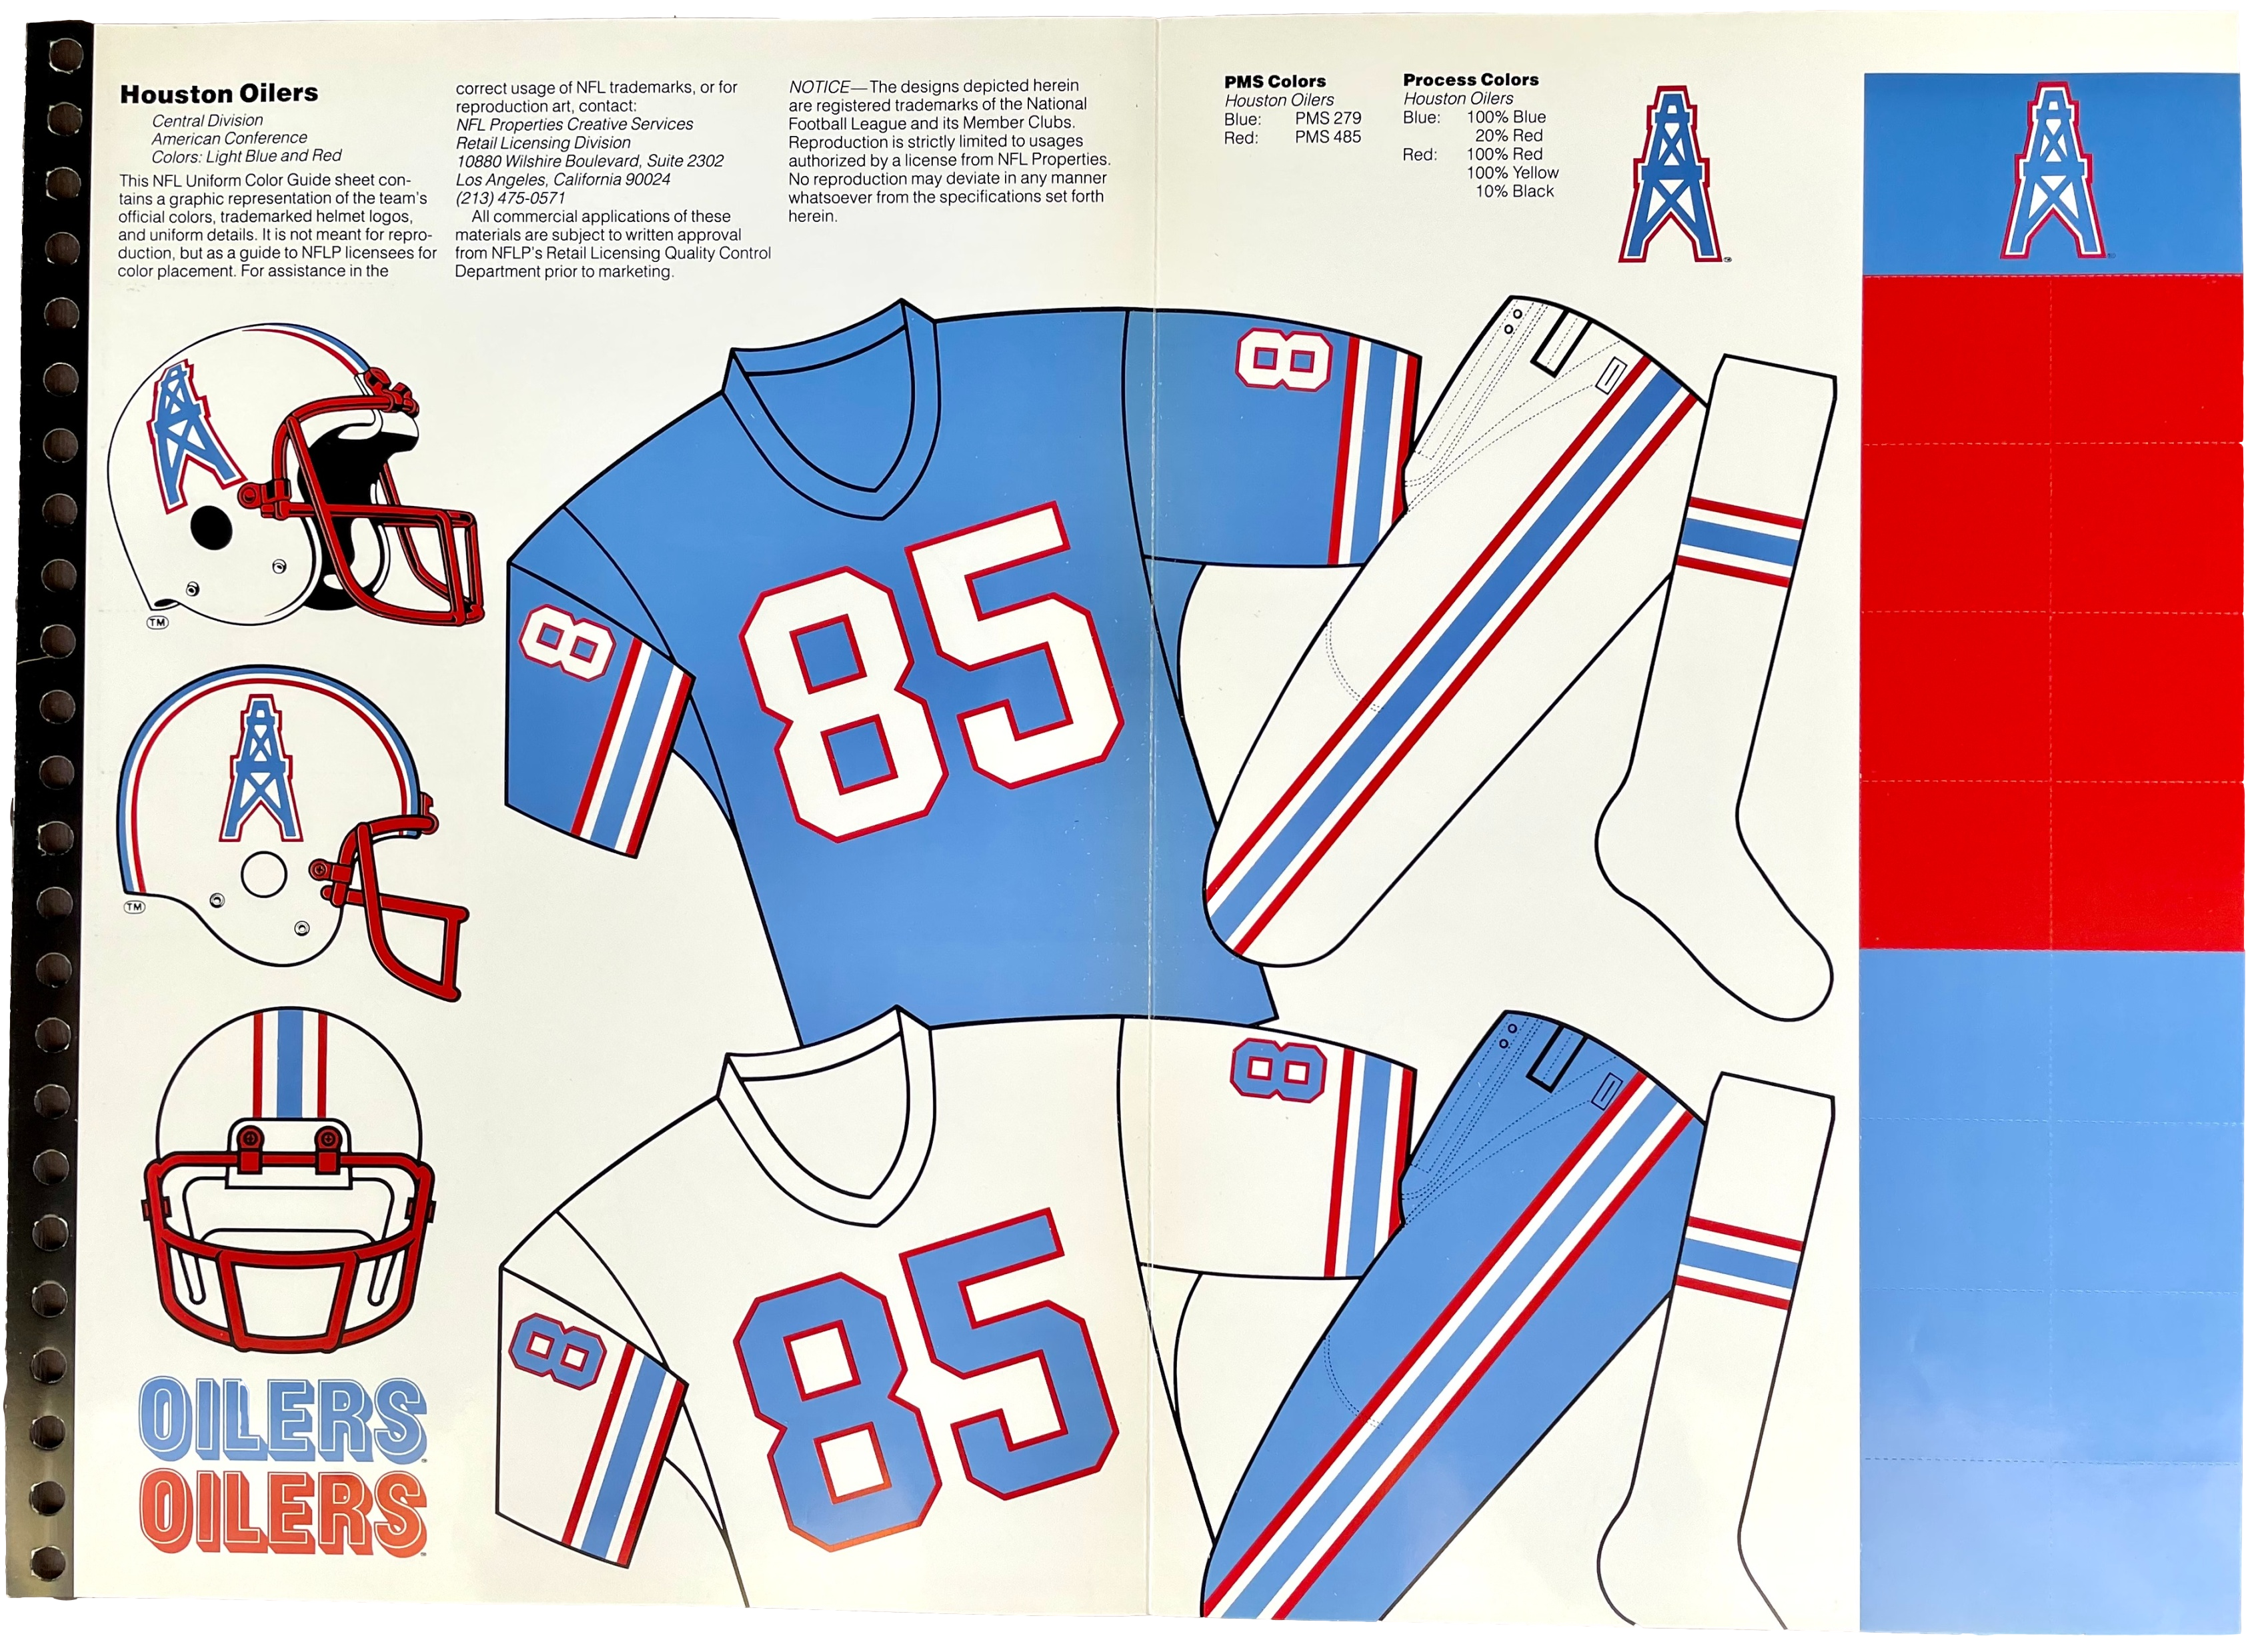 Tennessee Titans to wear Oilers throwback uniforms, maybe vs. Texans